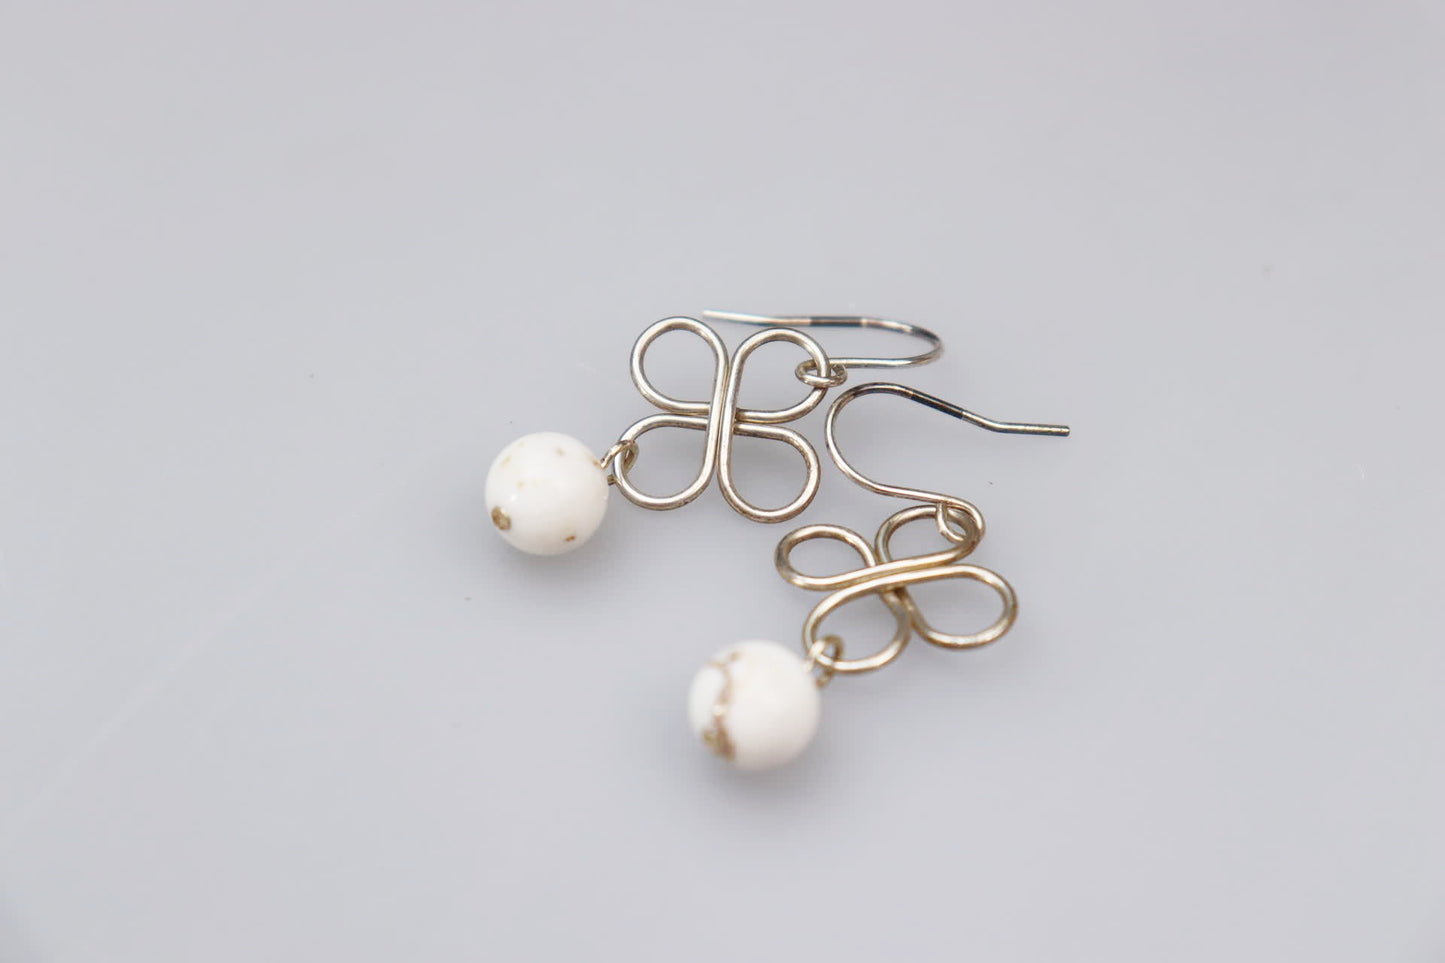 Clover Sterling Silver and White Turquoise Earrings